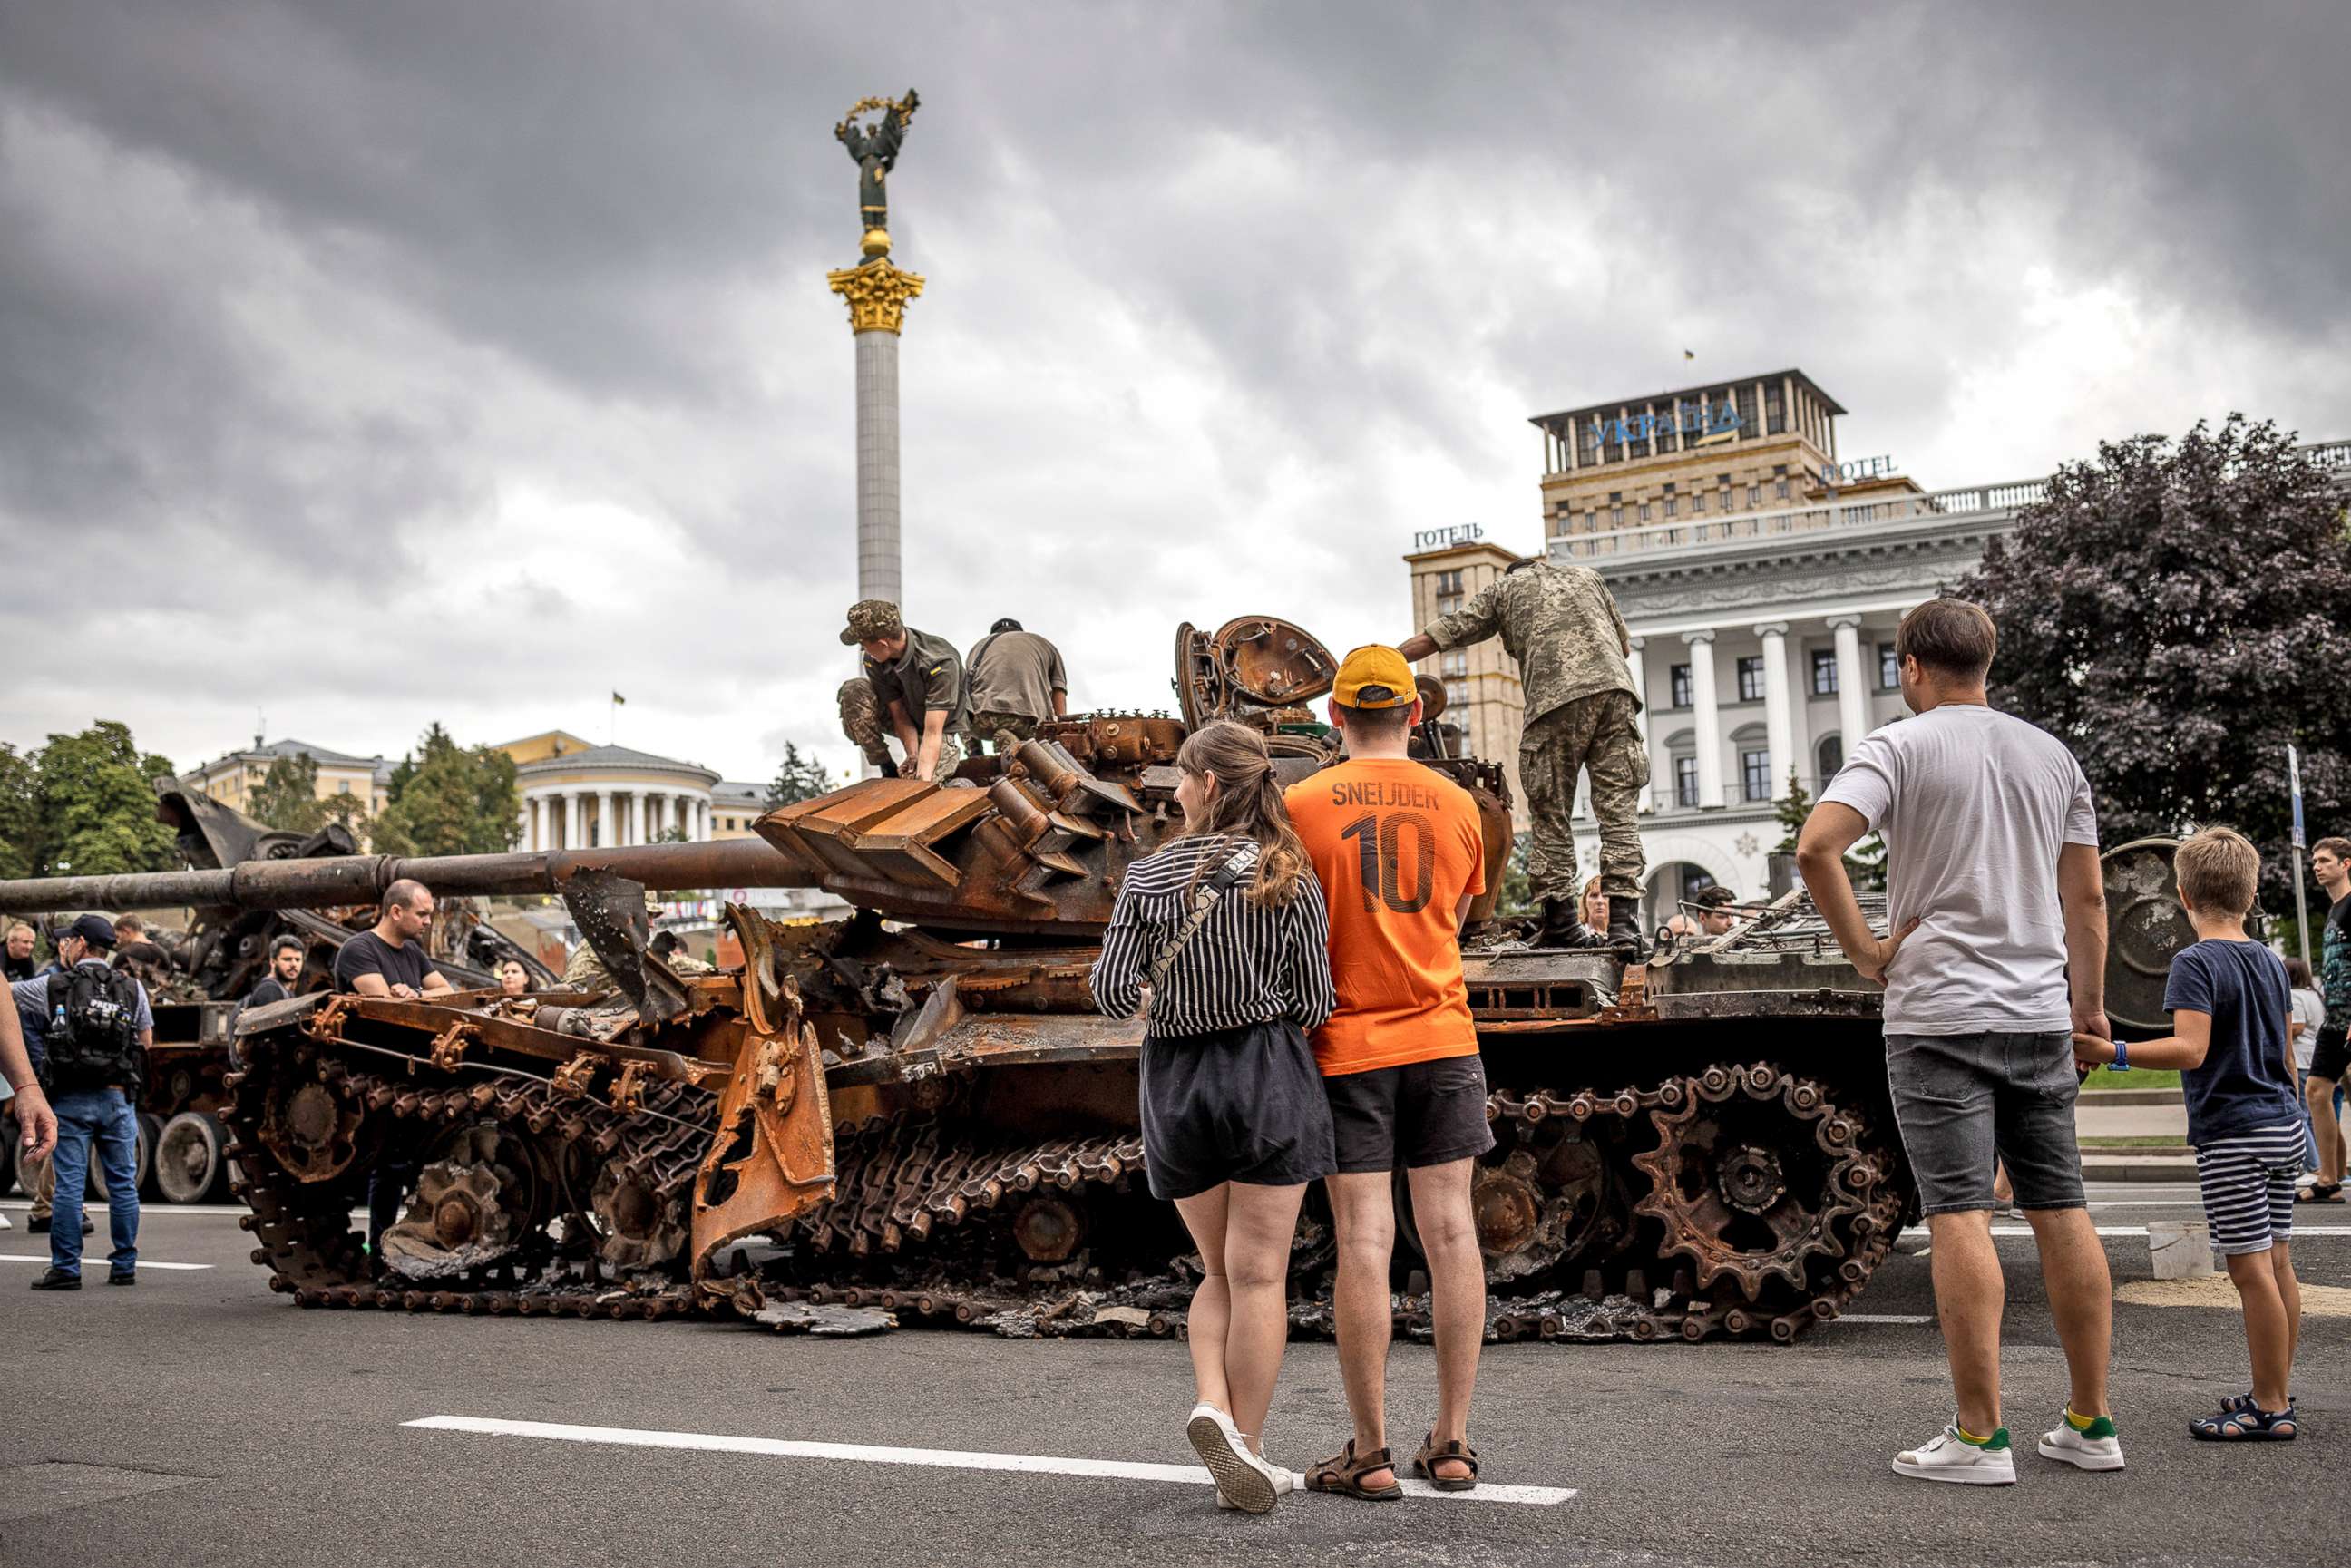 PHOTO: Damaged and destroyed Russian vehicles are on display in Maidan Square in central Kyiv, Ukraine, on Aug. 20, 2022. The tanks arrived on the backs of Ukrainian flatbed trucks, collected from the battlefields and put on display in a show of defiance.